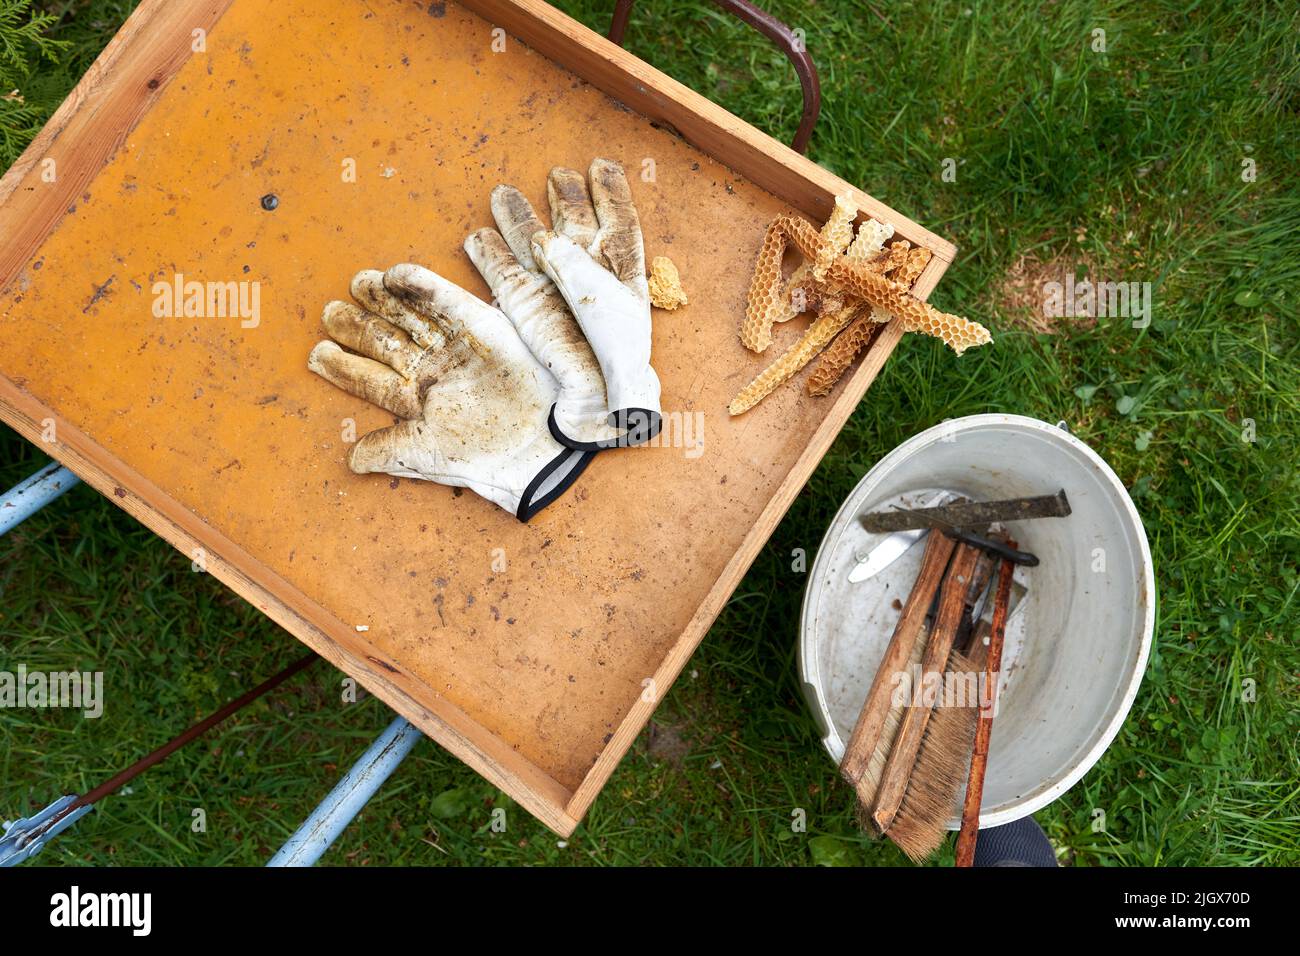 Wheelbarrow with protective gloves, tools and pieces of bee hive Stock Photo